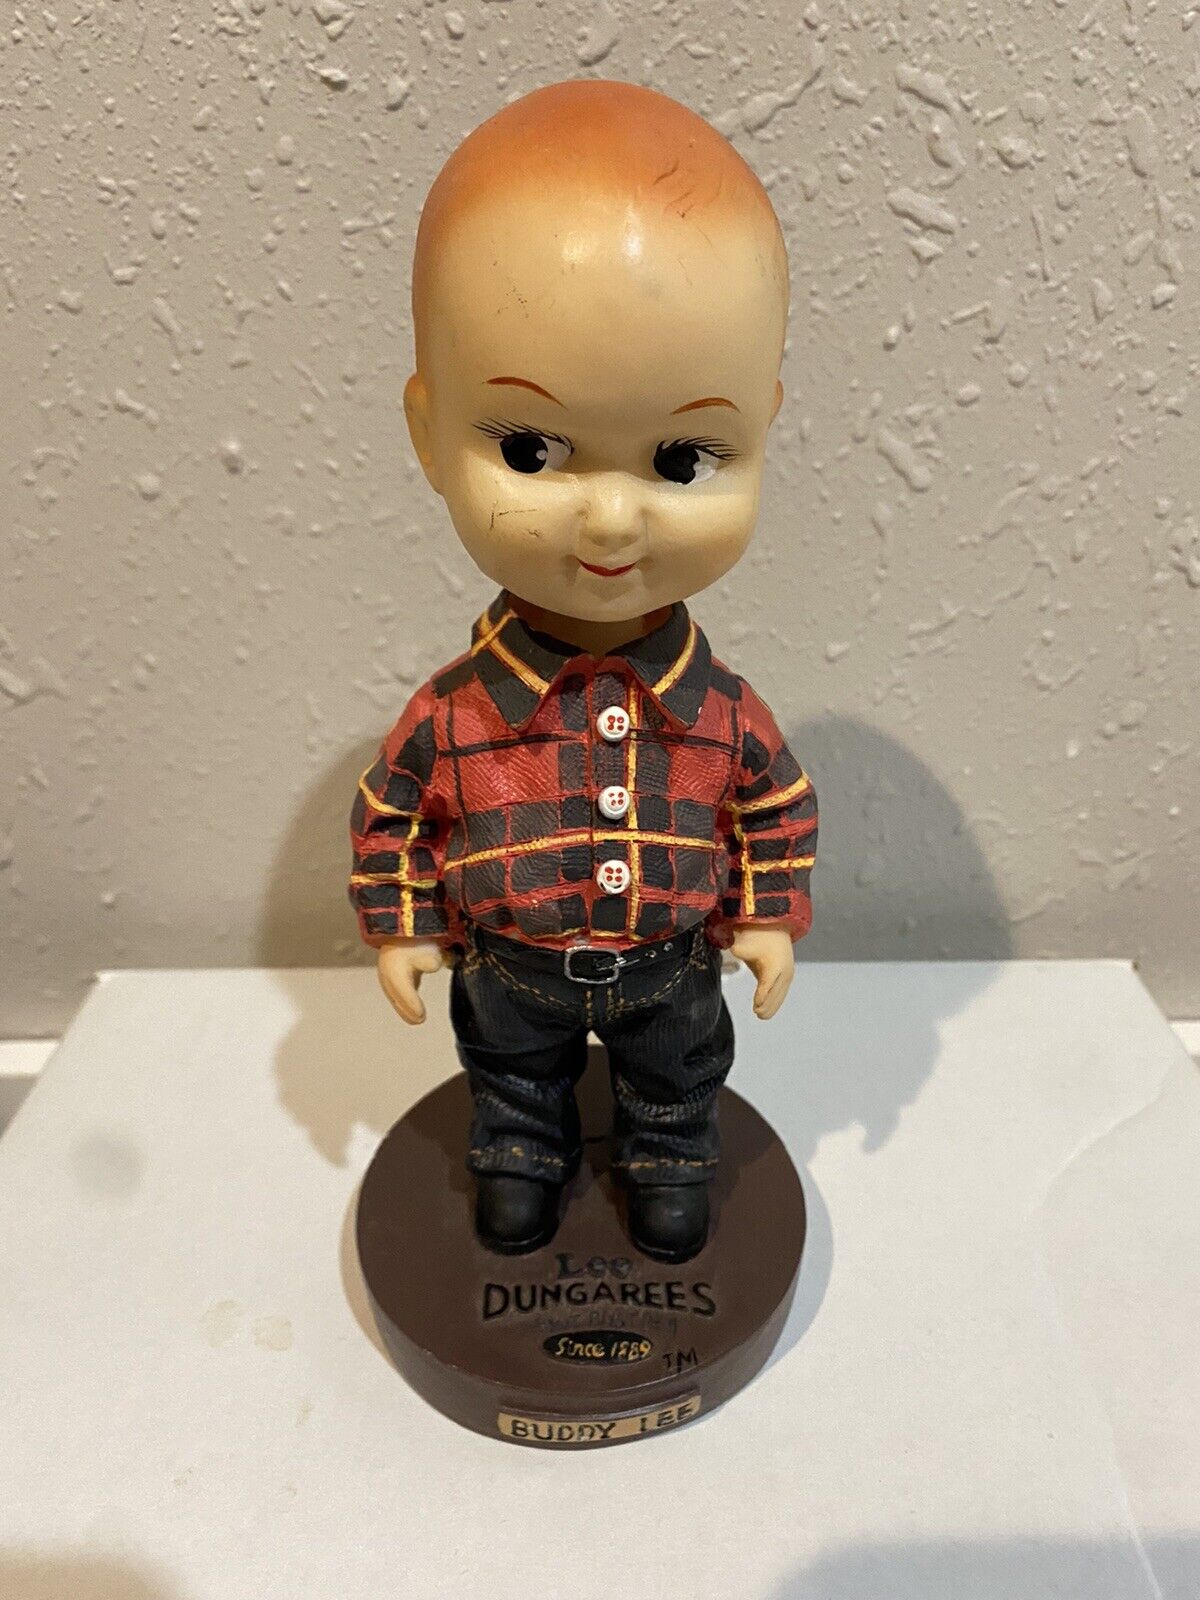 Lee Dungarees Buddy Lee 8" Bobble Head "can't Bust 'em"